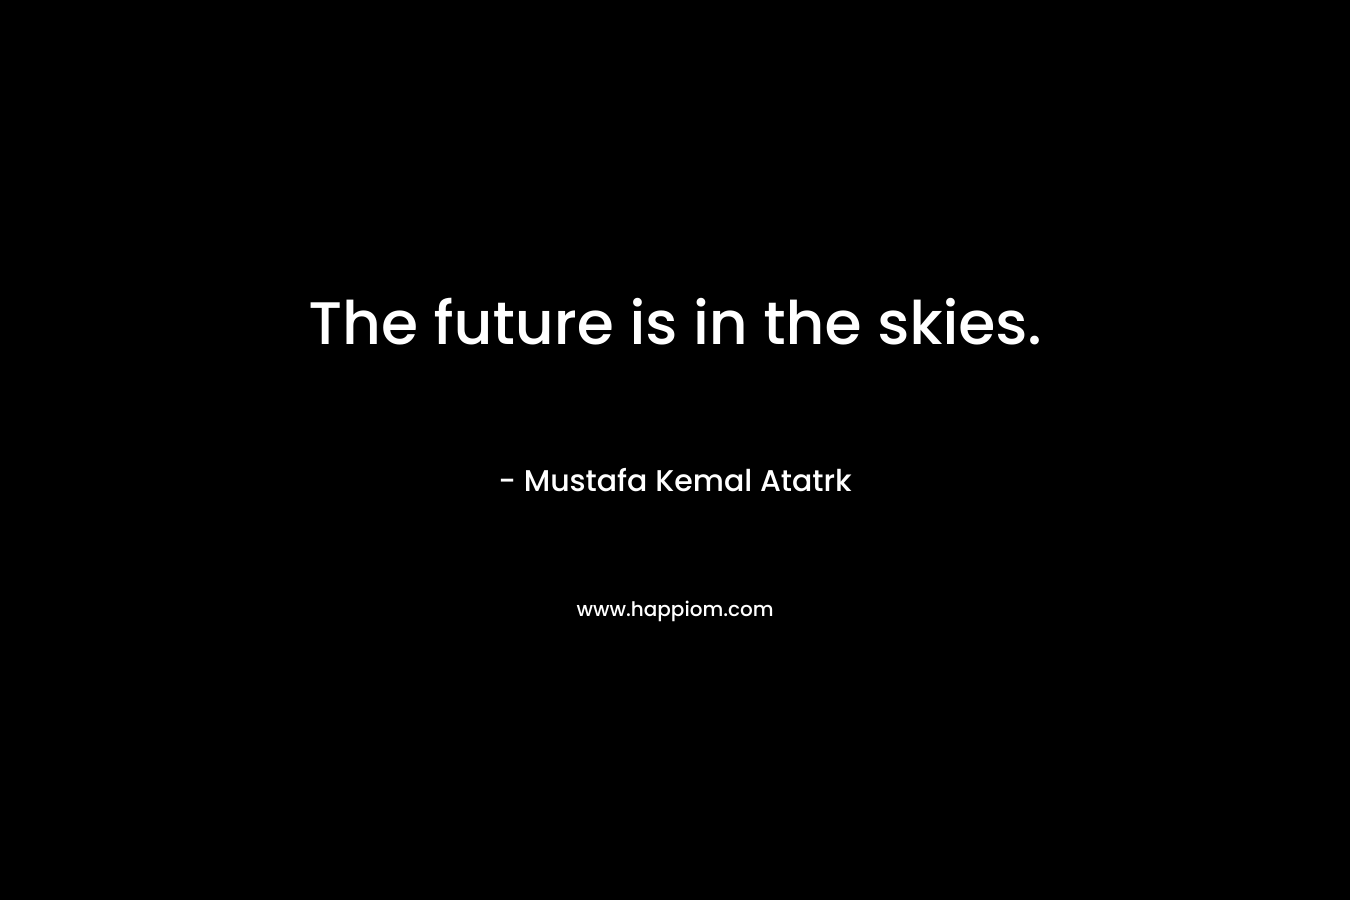 The future is in the skies.